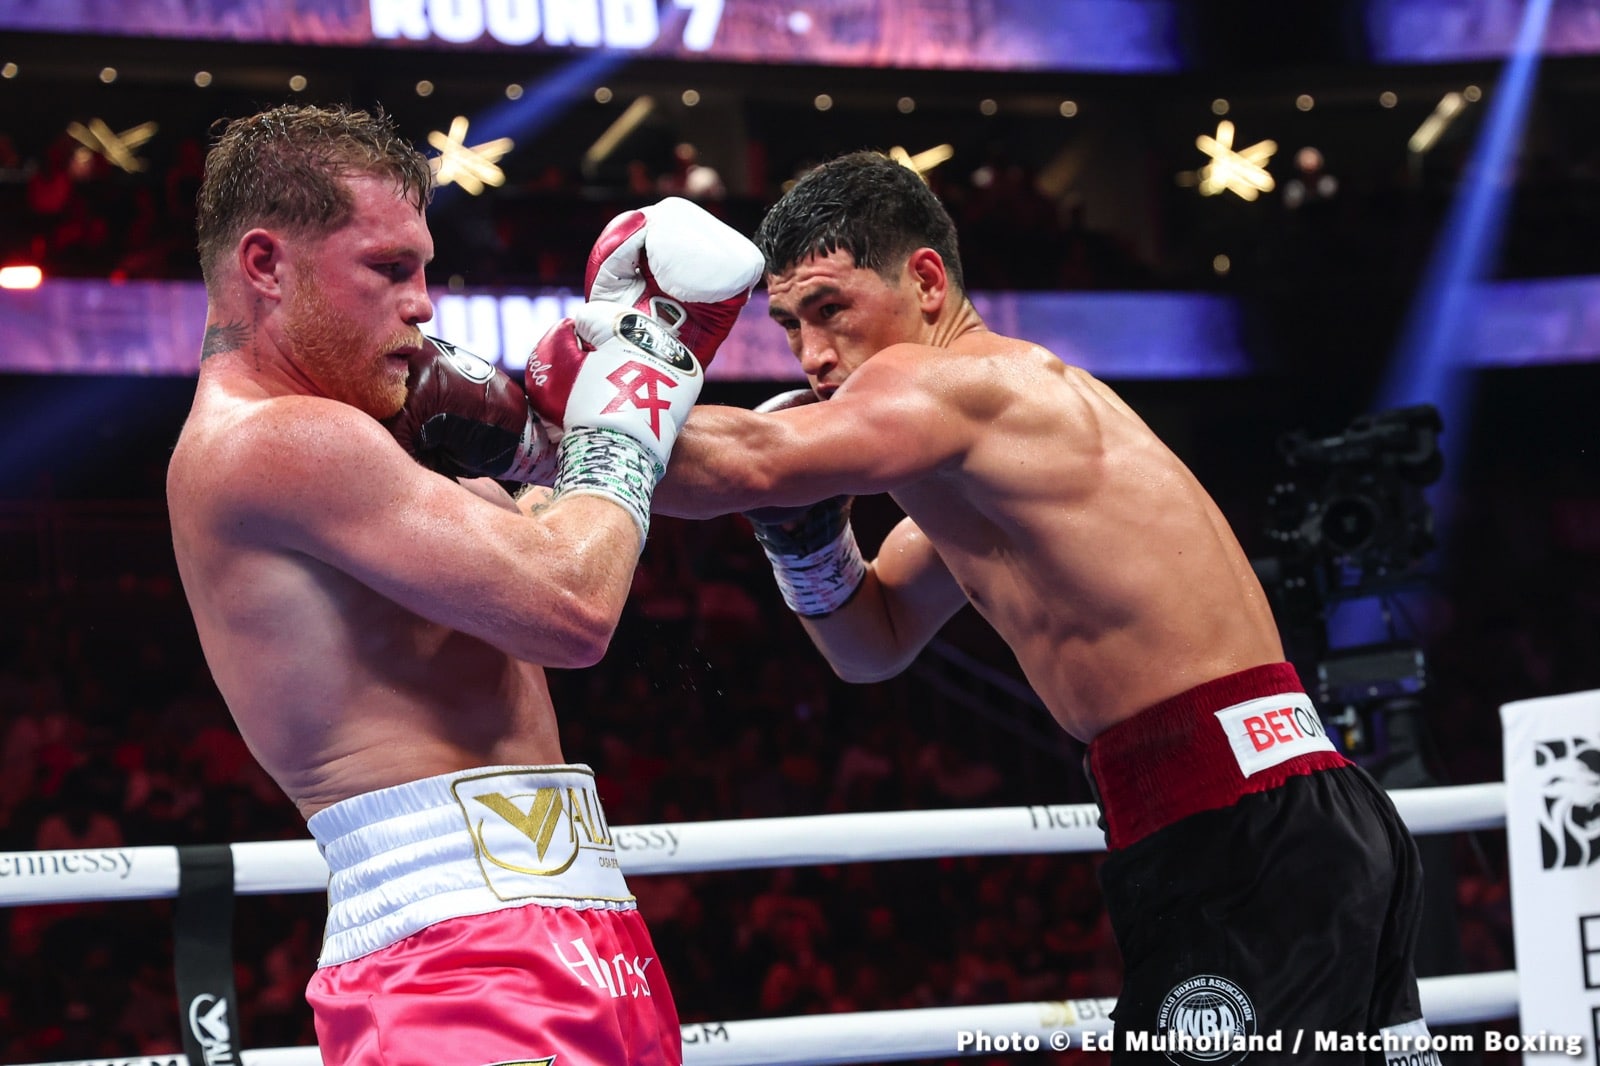 Bivol vs Alvarez II: Both Fighters Feel They Can “Do Better” In Rematch